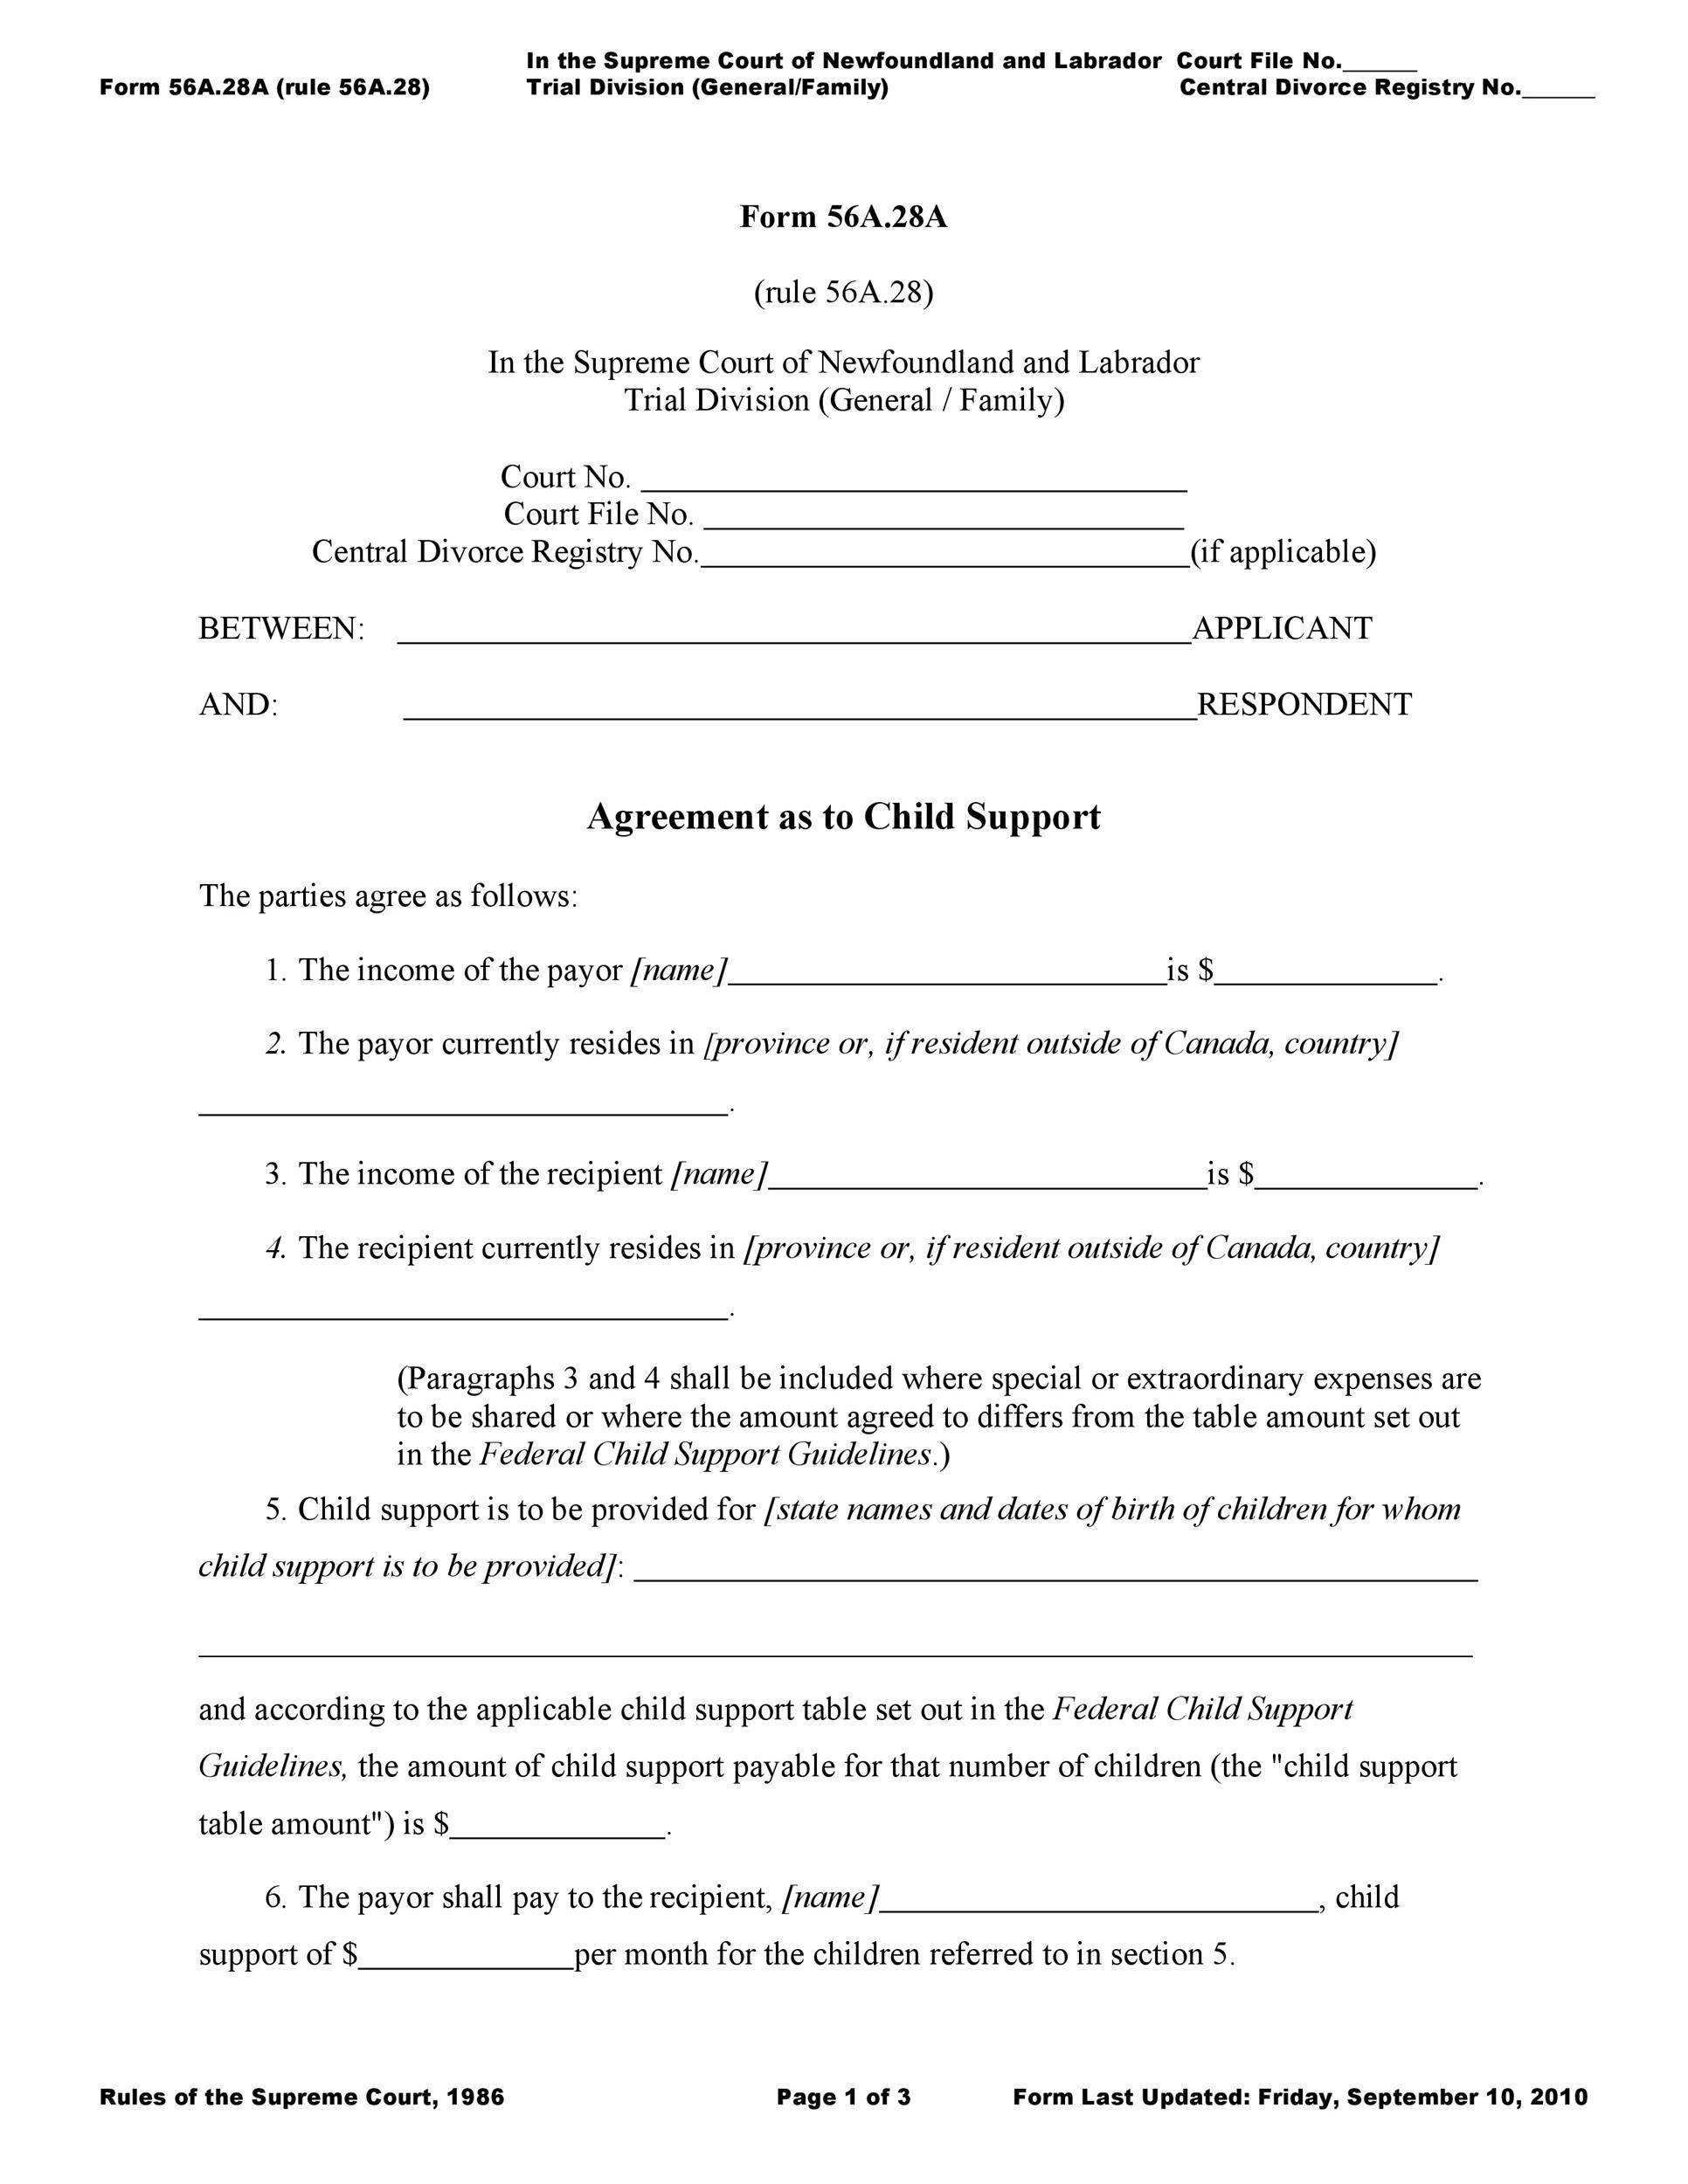 Free child support agreement 03